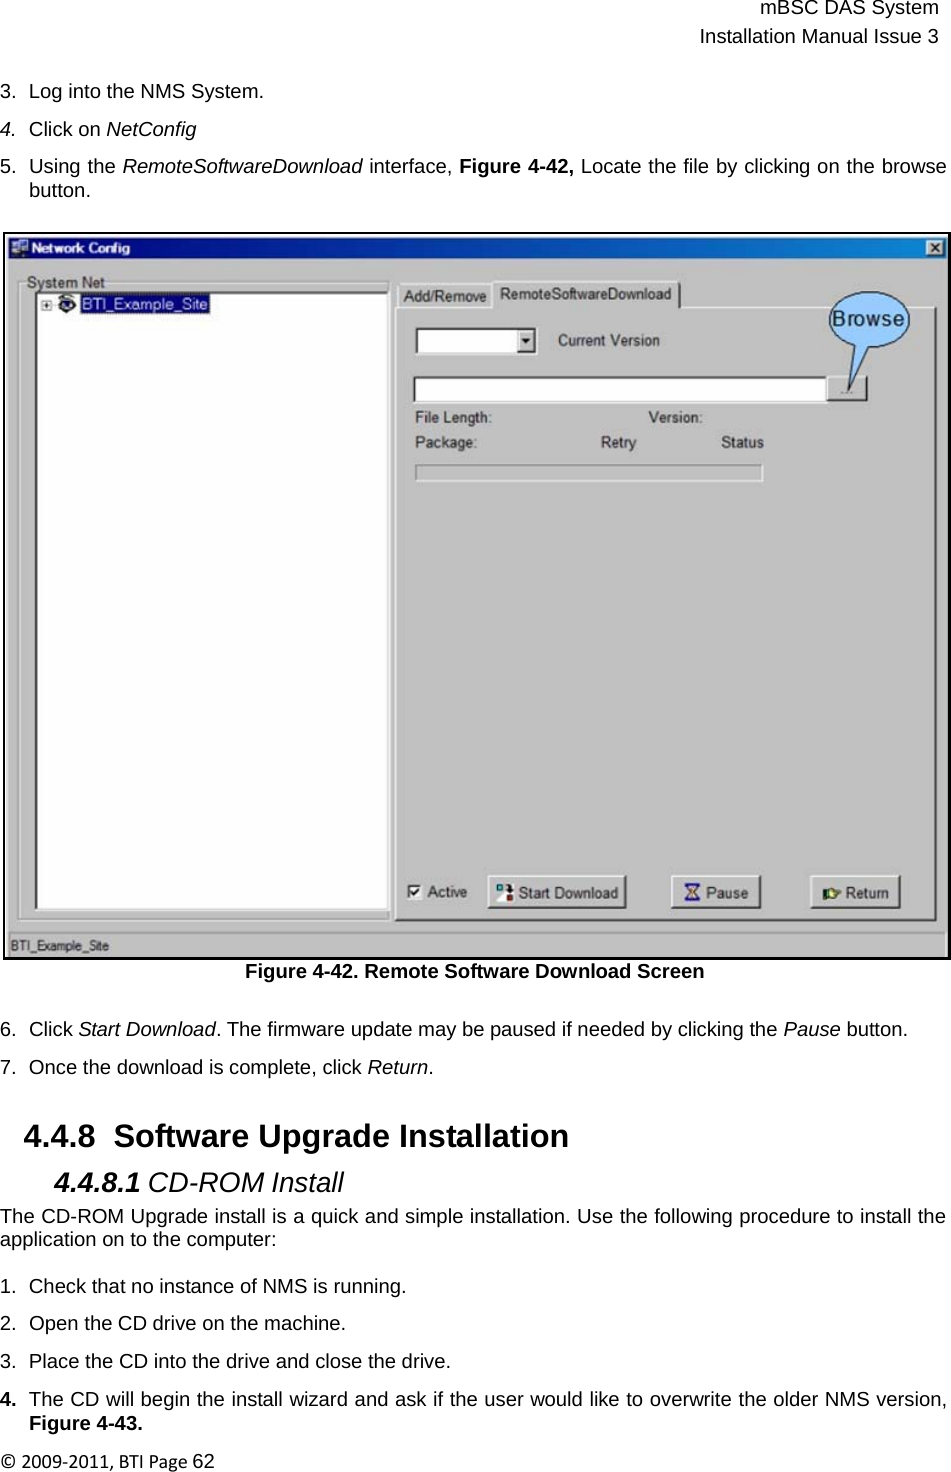 mBSC DAS SystemInstallation Manual Issue 3©2009‐2011,BTIPage62   3.  Log into the NMS System.  4.  Click on NetConfig  5.  Using the RemoteSoftwareDownload interface, Figure 4-42, Locate the file by clicking on the browse button.                                      Figure 4-42. Remote Software Download Screen   6.  Click Start Download. The firmware update may be paused if needed by clicking the Pause button.  7.  Once the download is complete, click Return.   4.4.8  Software Upgrade Installation  4.4.8.1 CD-ROM Install The CD-ROM Upgrade install is a quick and simple installation. Use the following procedure to install the application on to the computer:  1.  Check that no instance of NMS is running.  2.  Open the CD drive on the machine.  3.  Place the CD into the drive and close the drive.  4.  The CD will begin the install wizard and ask if the user would like to overwrite the older NMS version, Figure 4-43. 